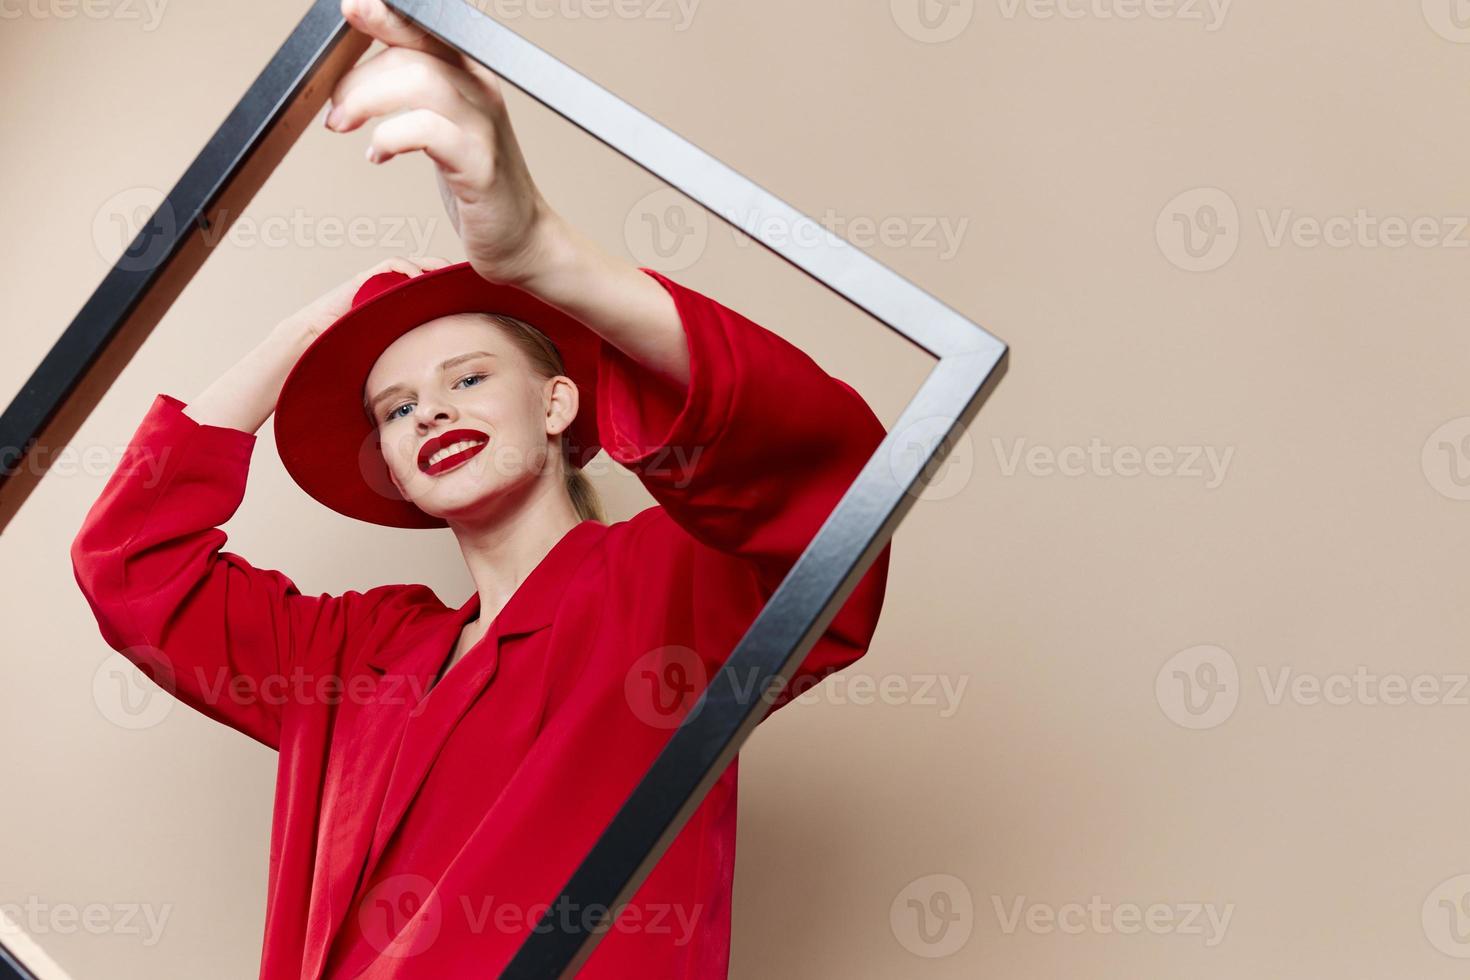 fashionable woman with wooden frame posing red suit beige background photo